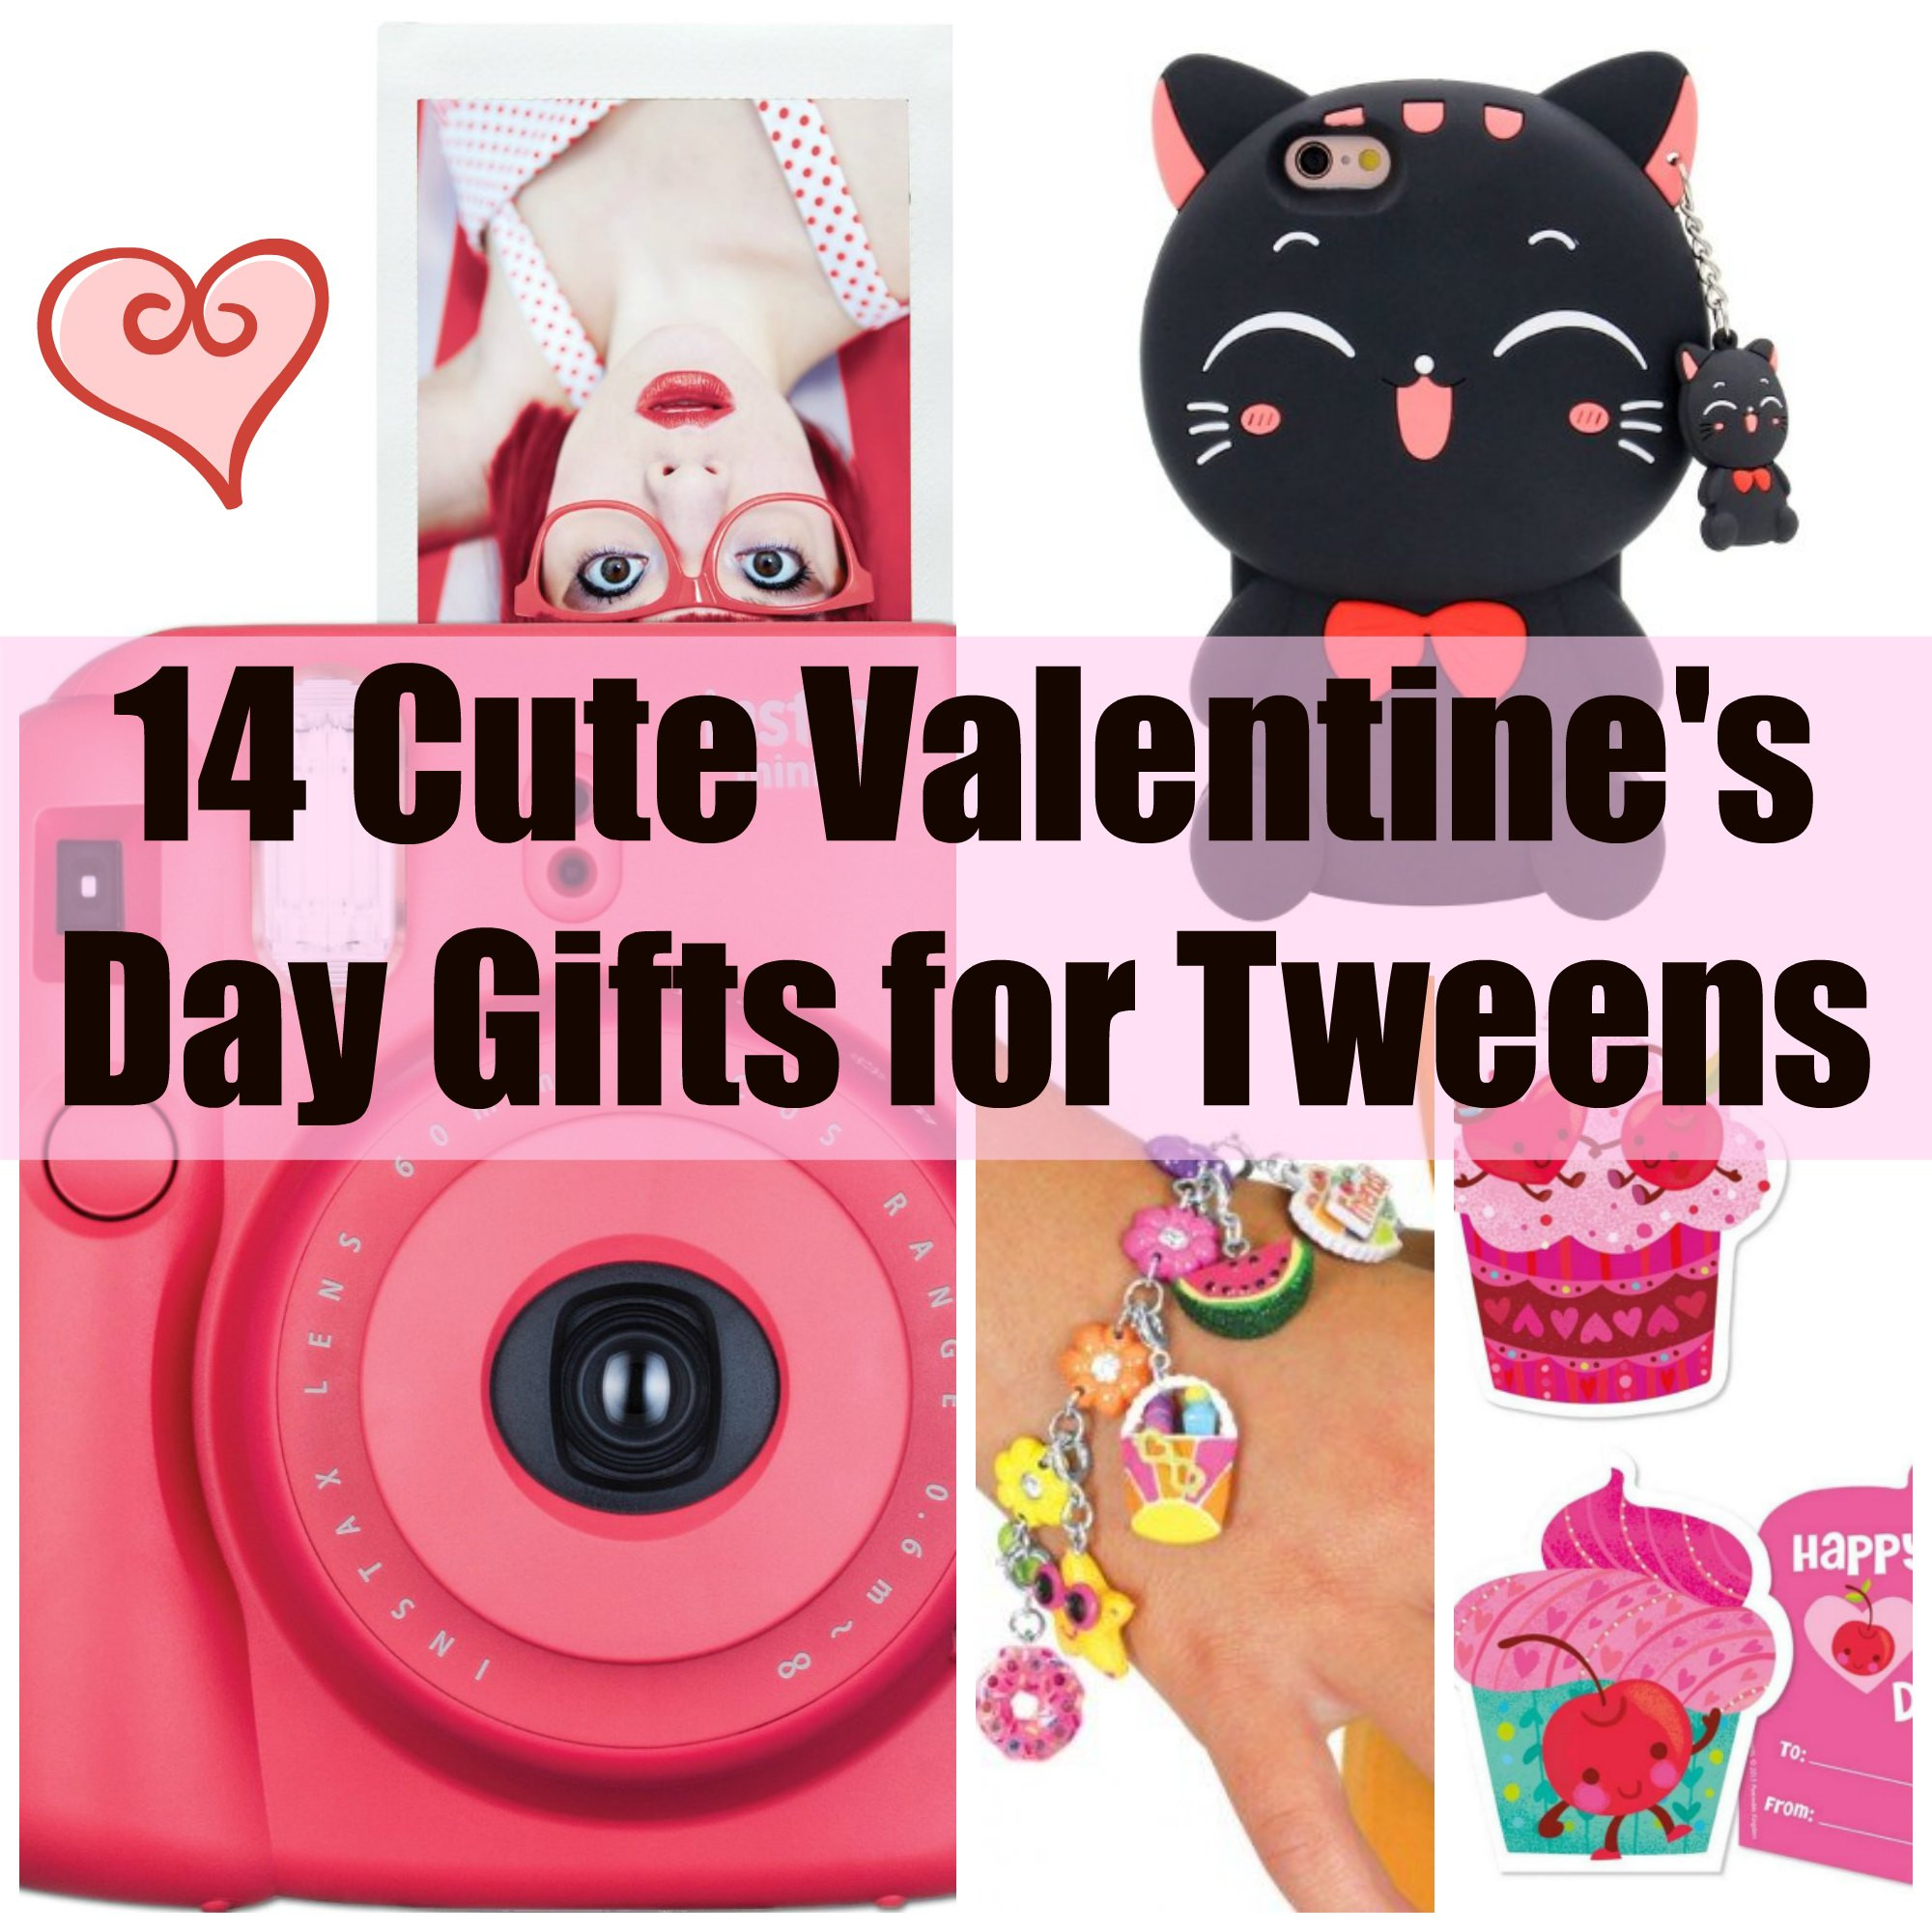 Valentines Gift Ideas For Teens
 14 Cute Valentine Gifts for Teens and Tweens